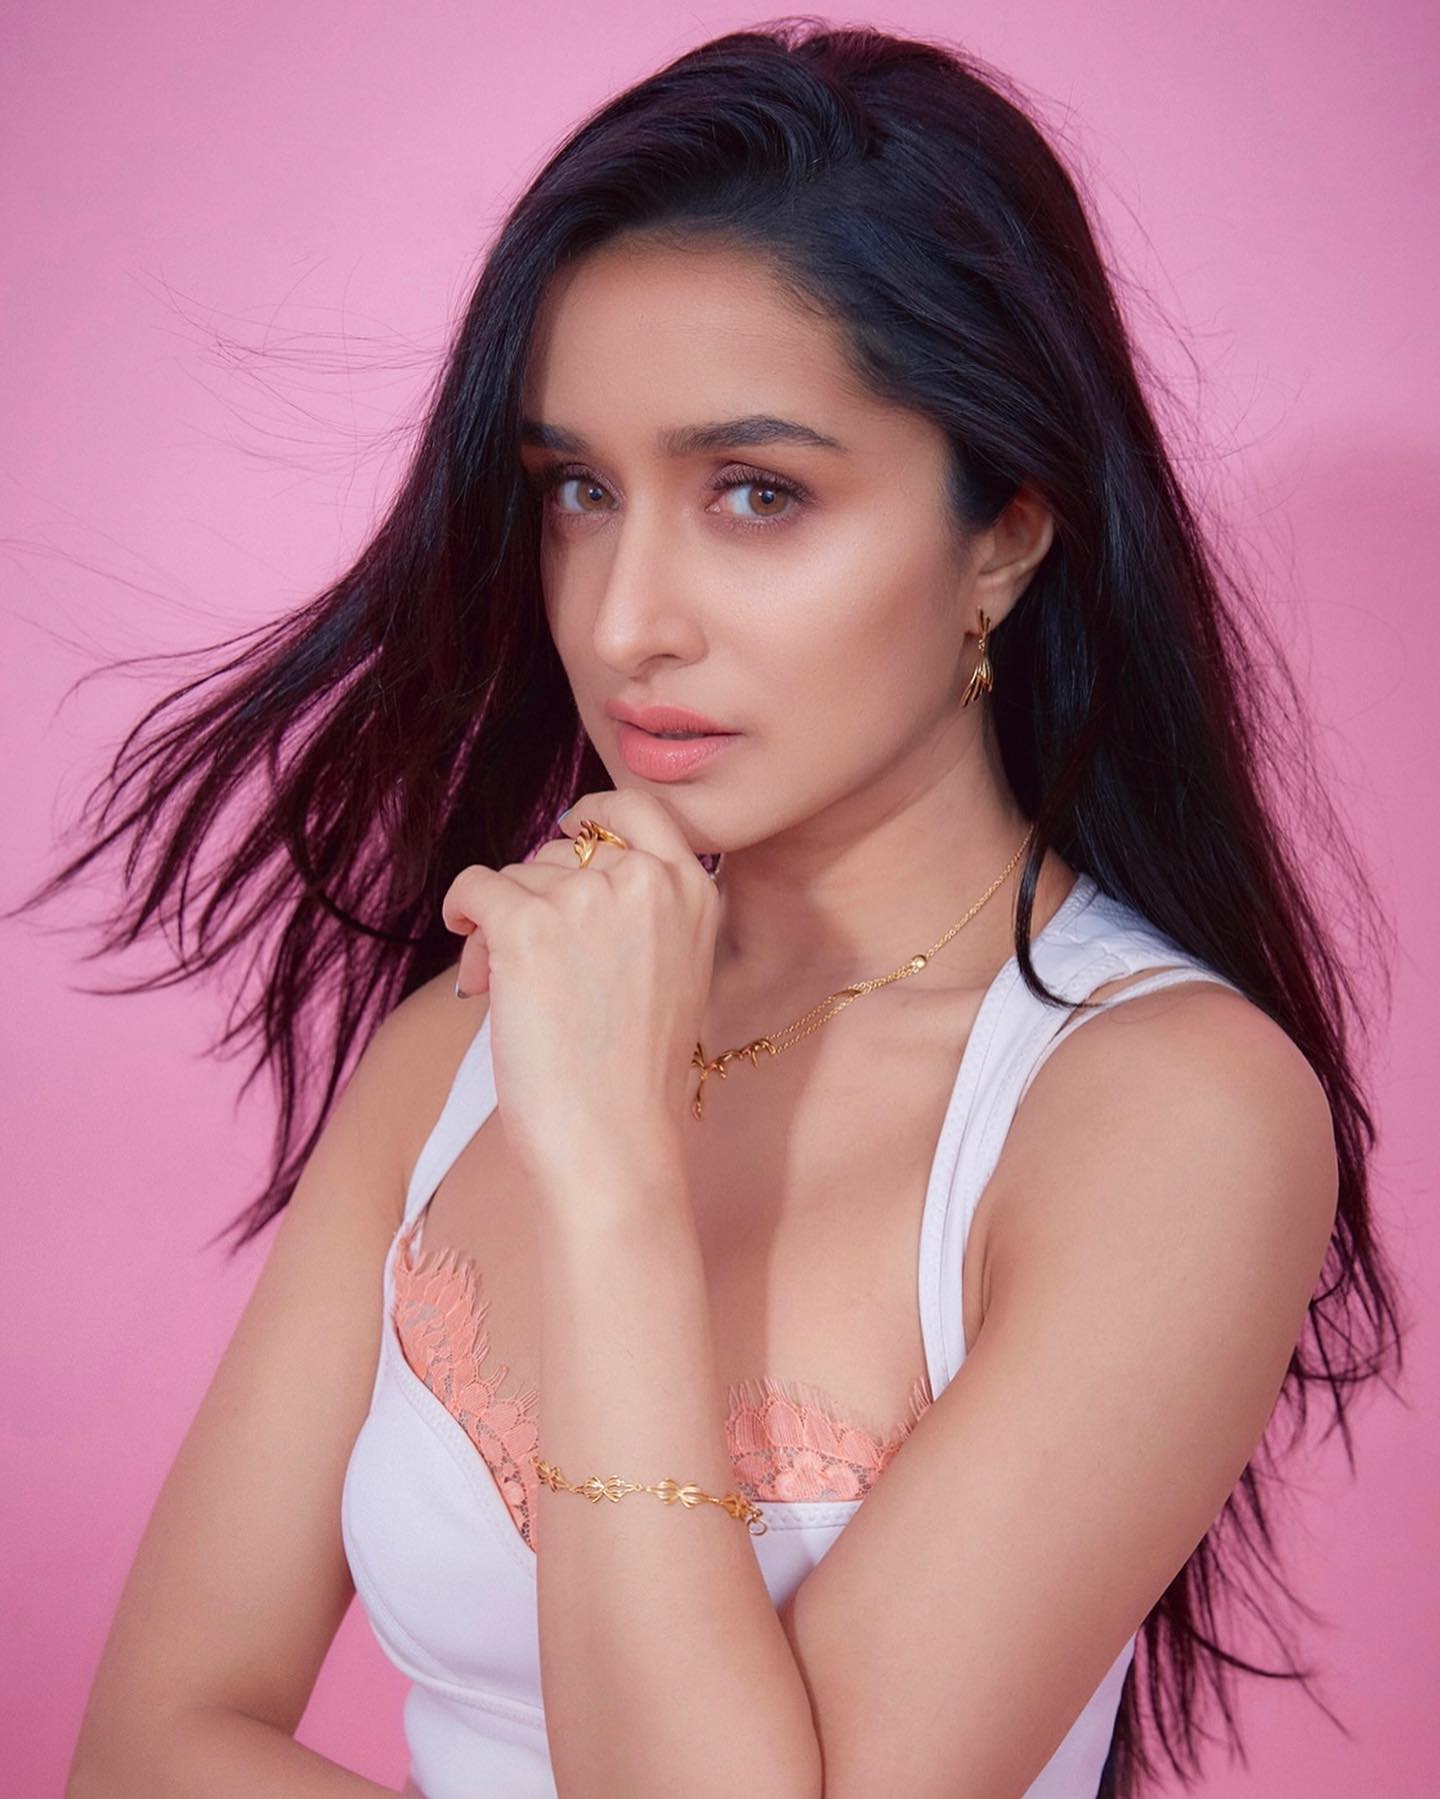 To complete her glam picks, Shraddha went with subtle eye shadow, blushed cheeks, glowing skin, sharp contour and neutral lip shade. Shraddha styled her ensemble with minimal accessories.